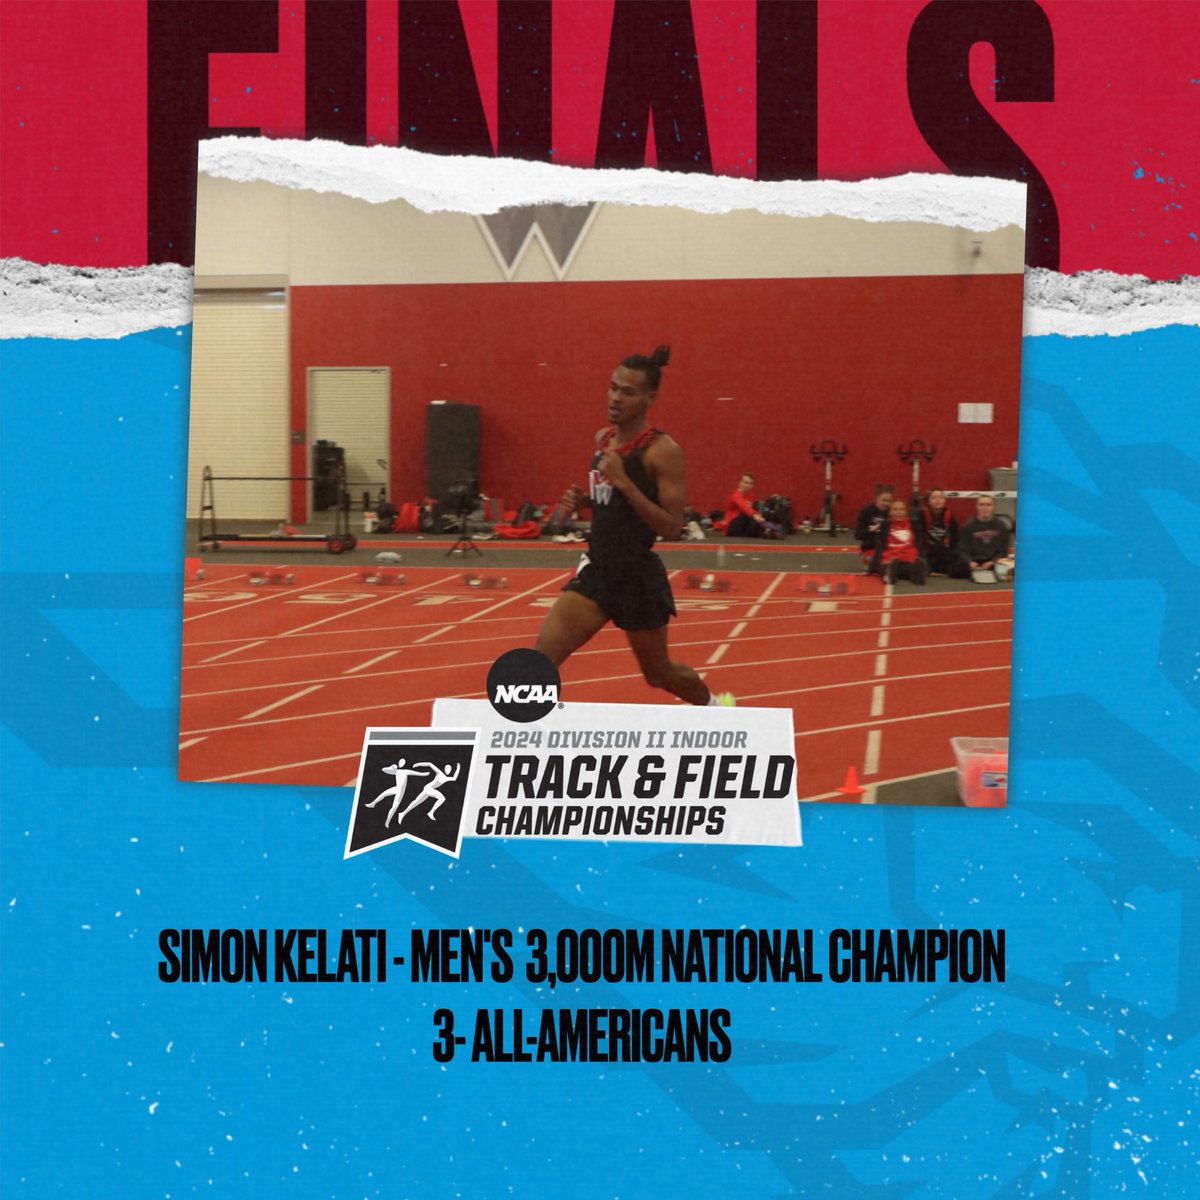 The Mountaineers are bringing home some hardware to close the Indoor season as Simon Kelati is the national champion in the men's 3,000m! Western Colorado also earned three All-American titles on the second day of the national meet!